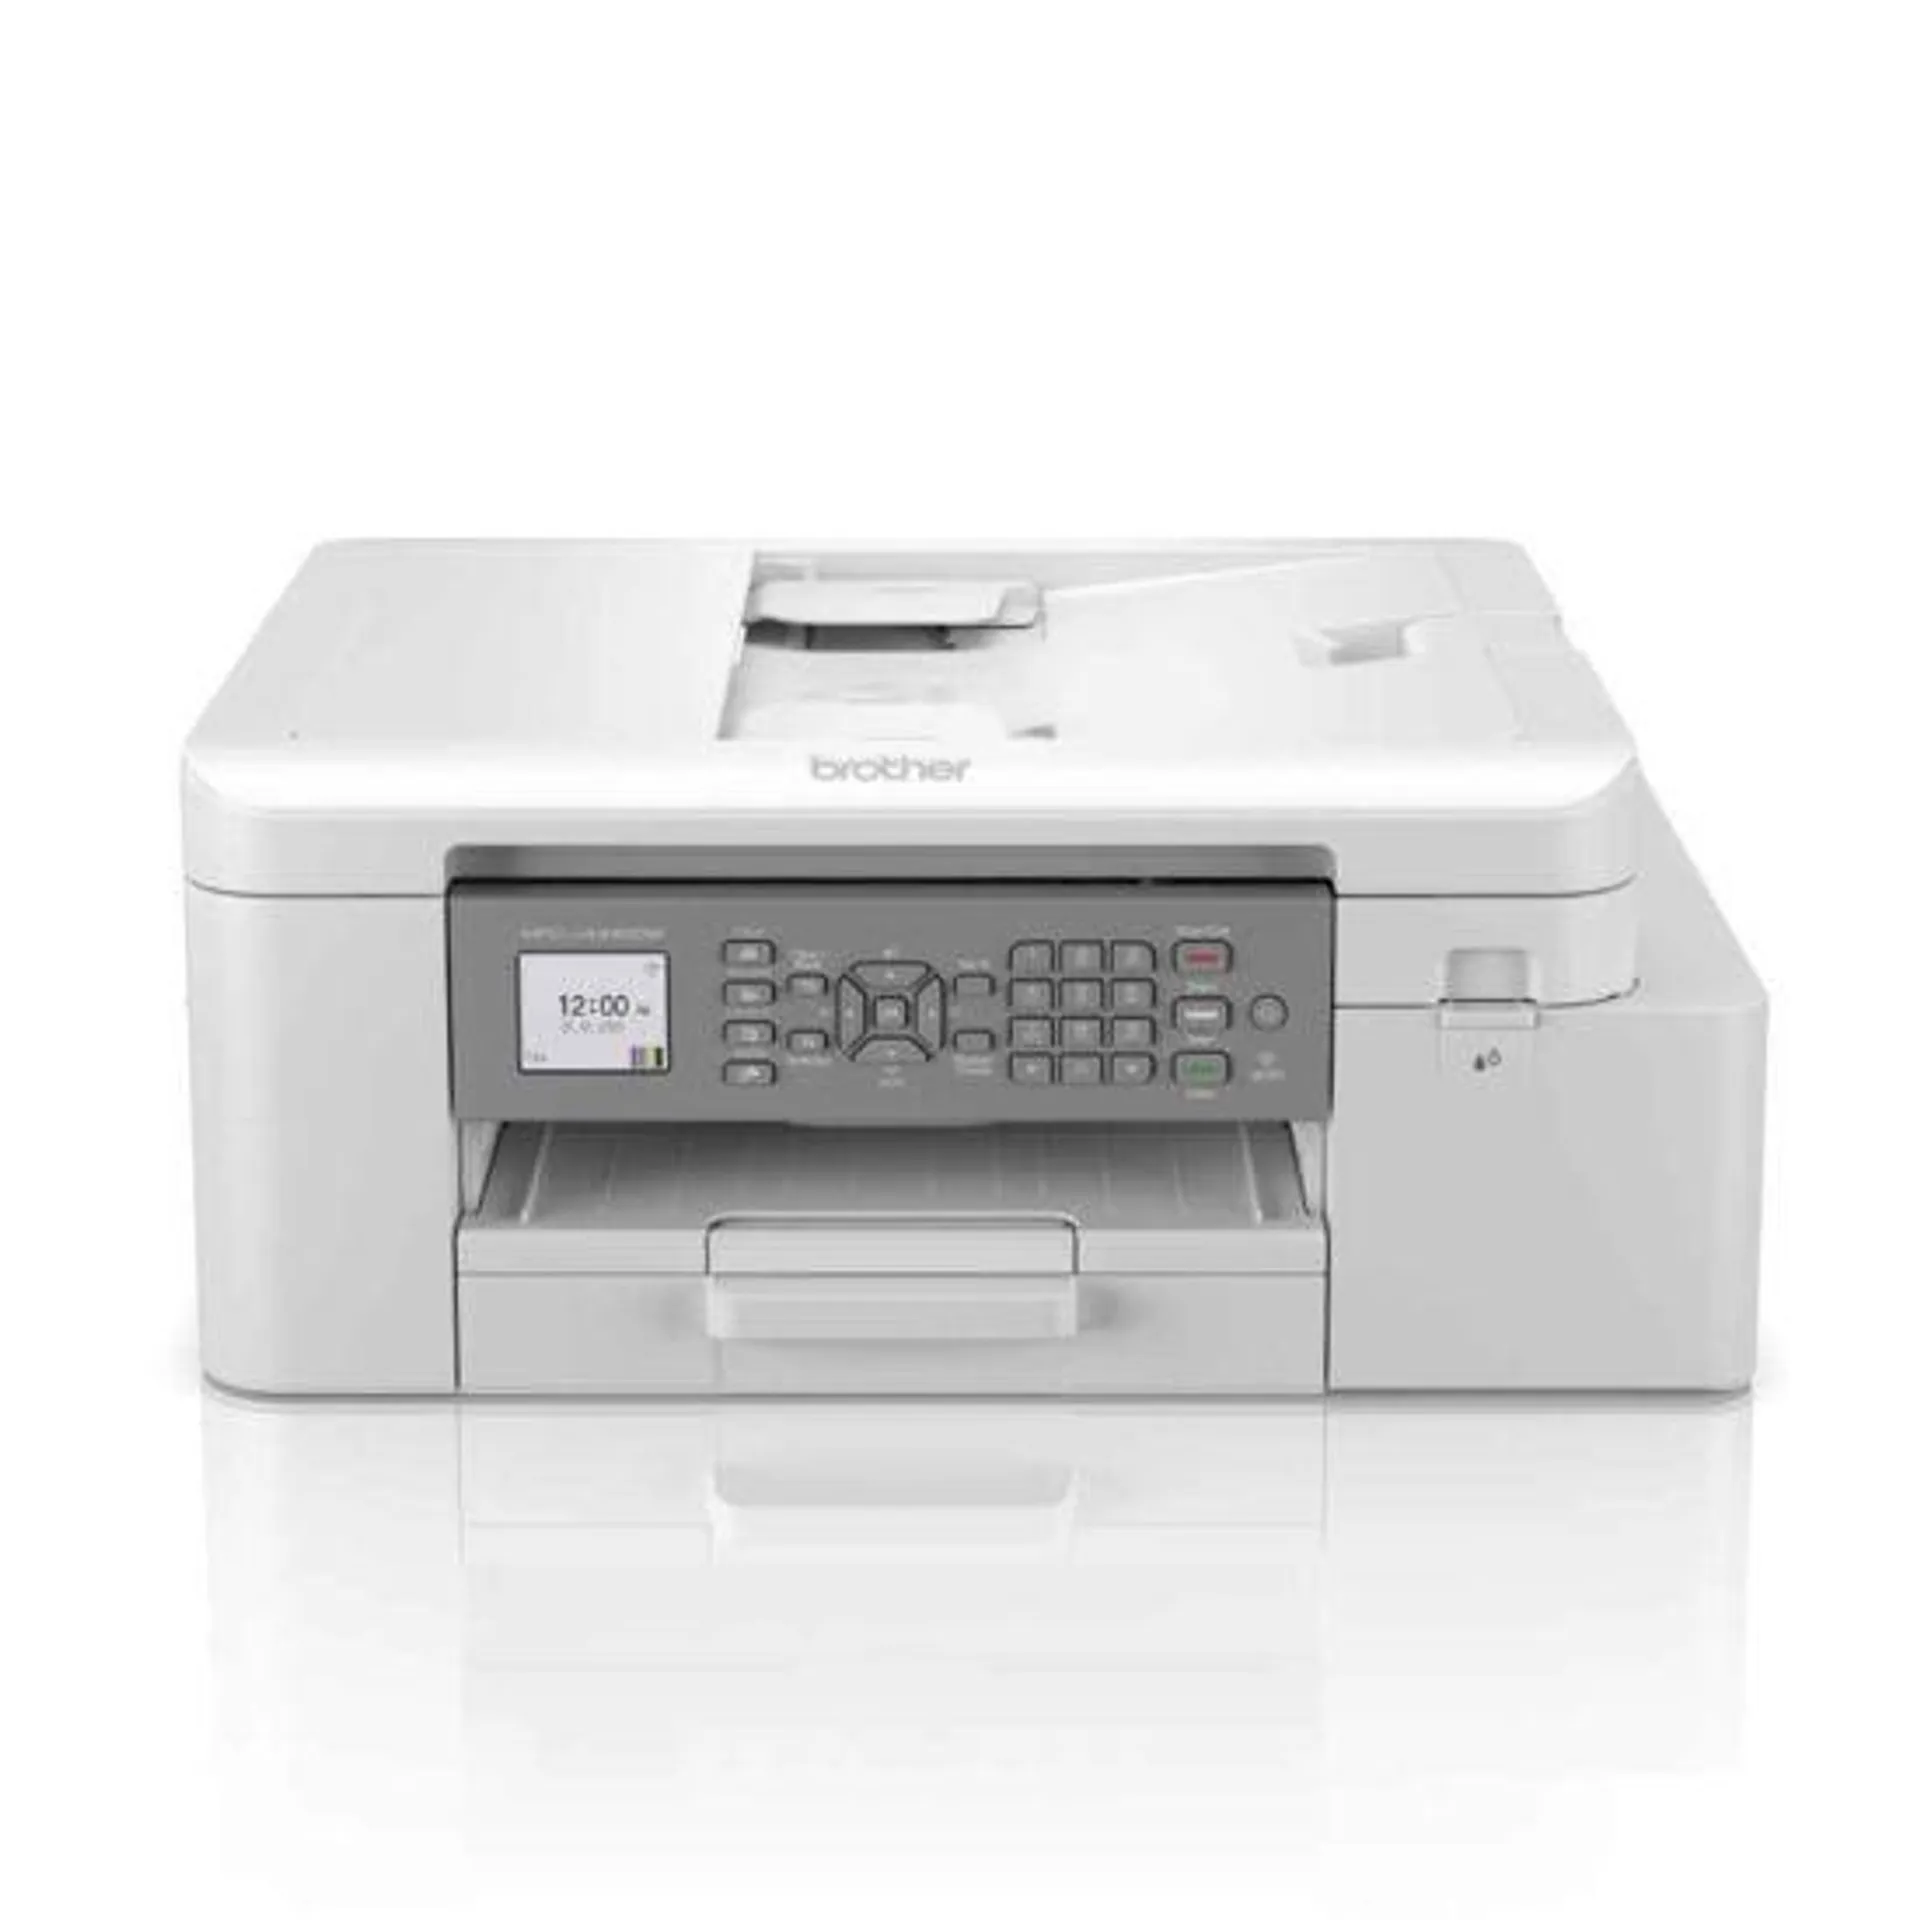 Brother MFC-J4340DW Wireless All-in-One A4 Inkjet Printer